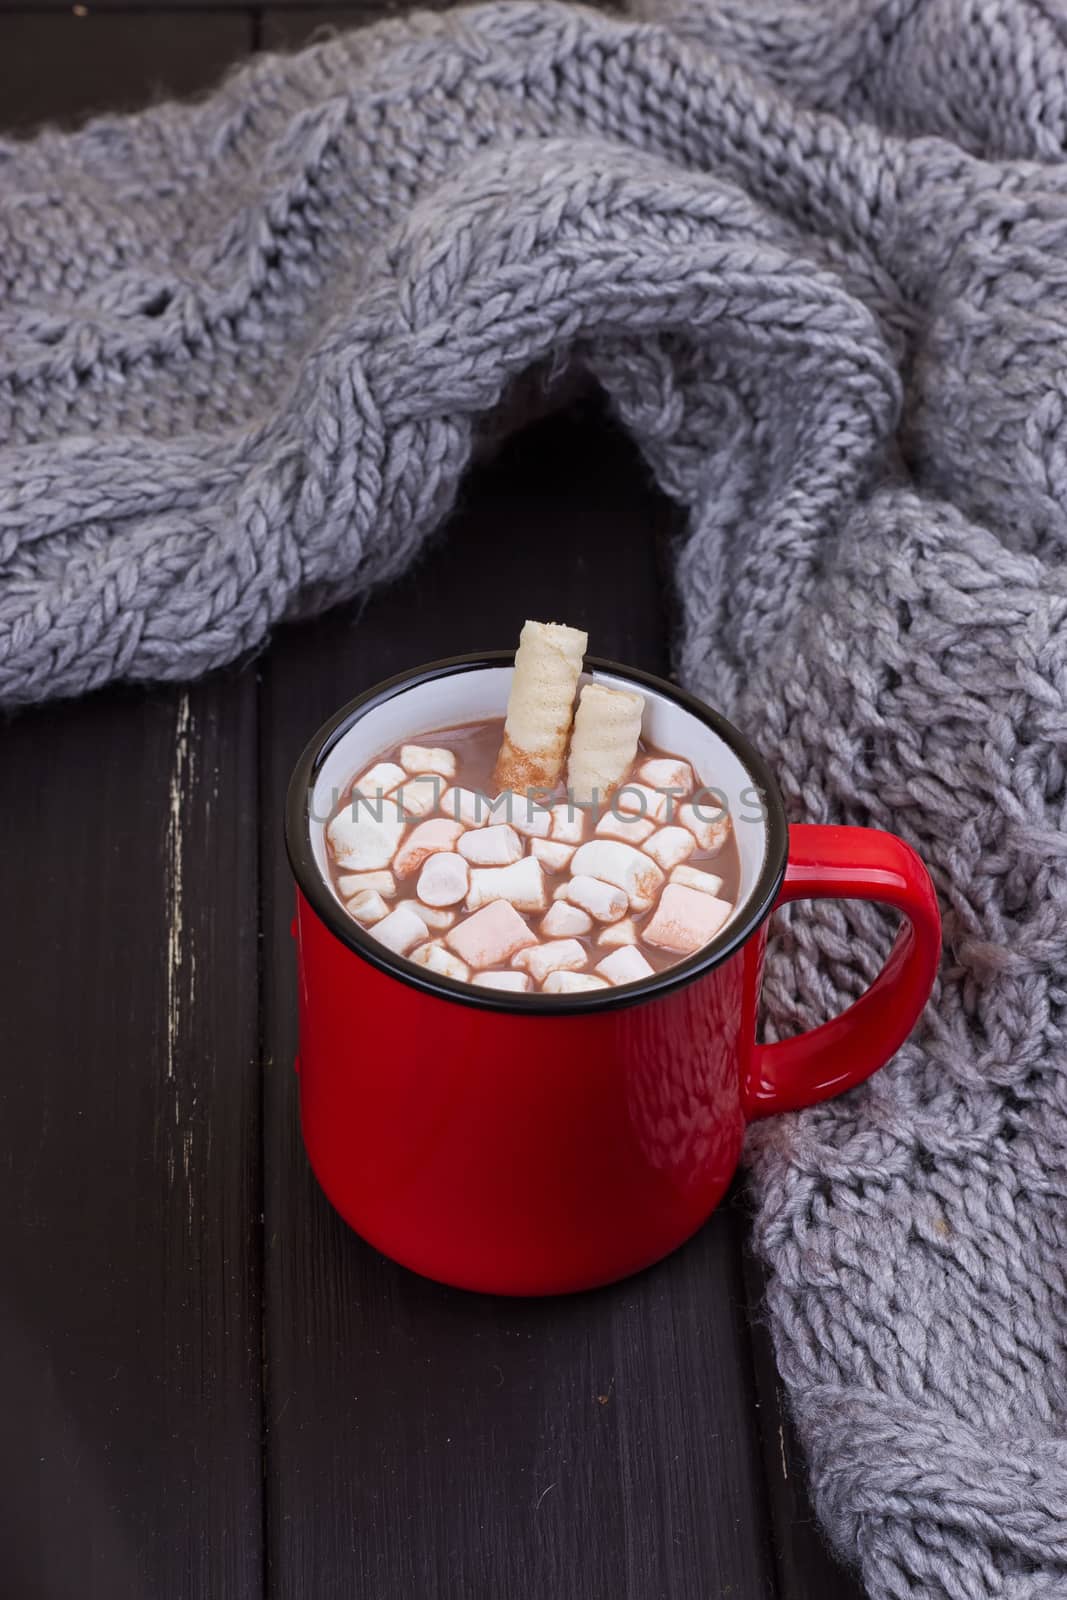 Hot cocoa with marshmallows with spices on the old wooden boards. Coffee, cocoa, cinnamon, nuts, cozy sweater. Autumn Still Life